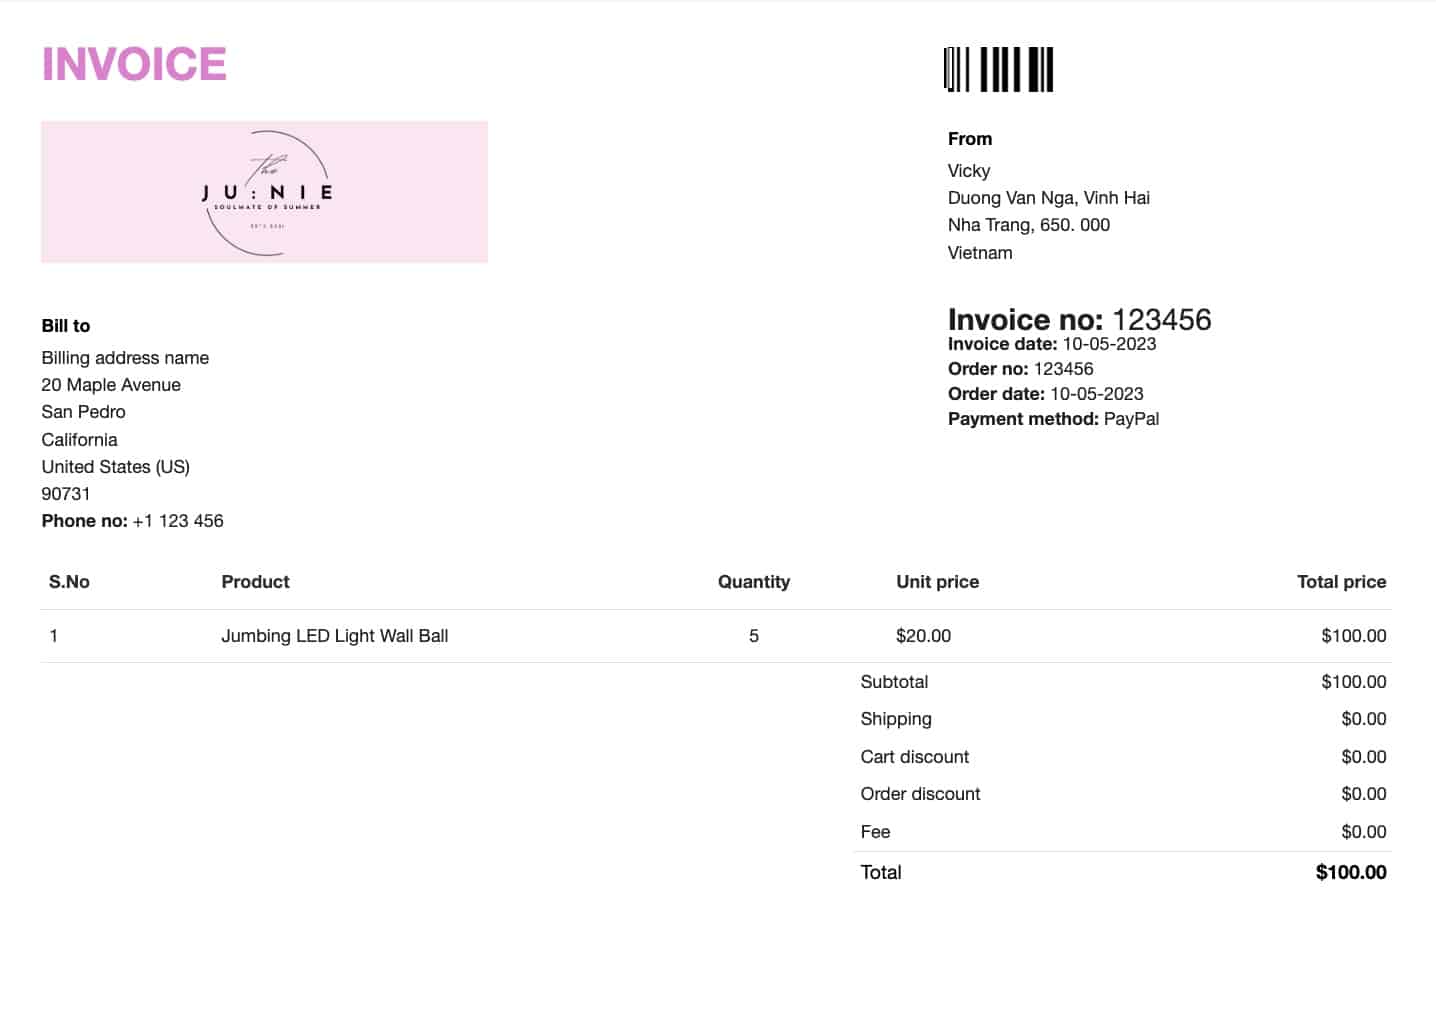 Invoice template of WooCommerce
